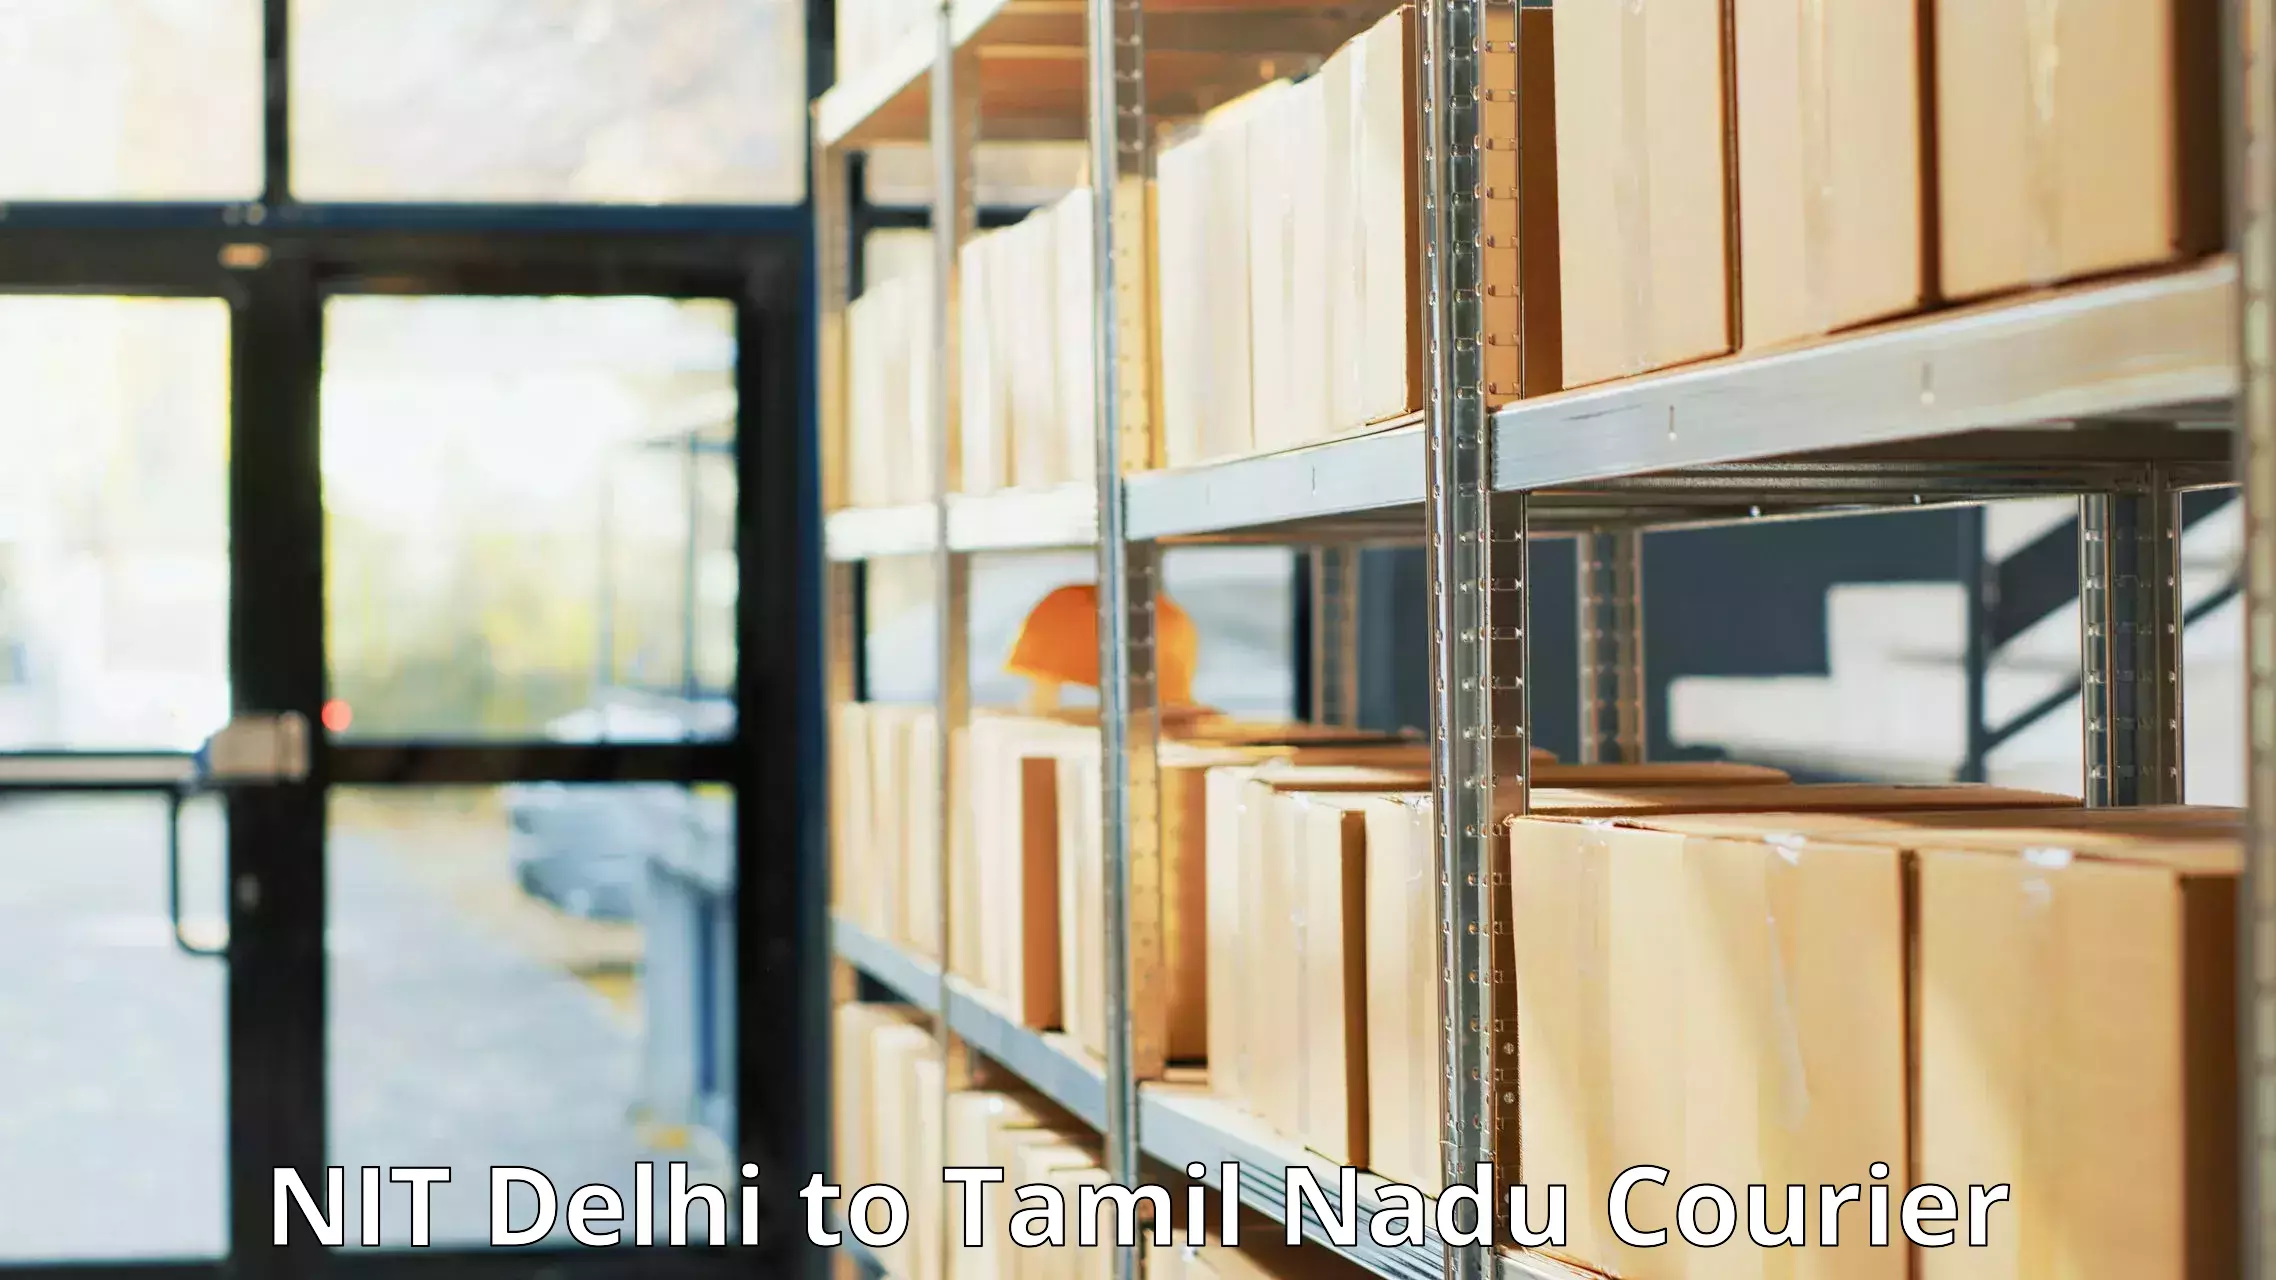 Small business couriers NIT Delhi to Tirupattur